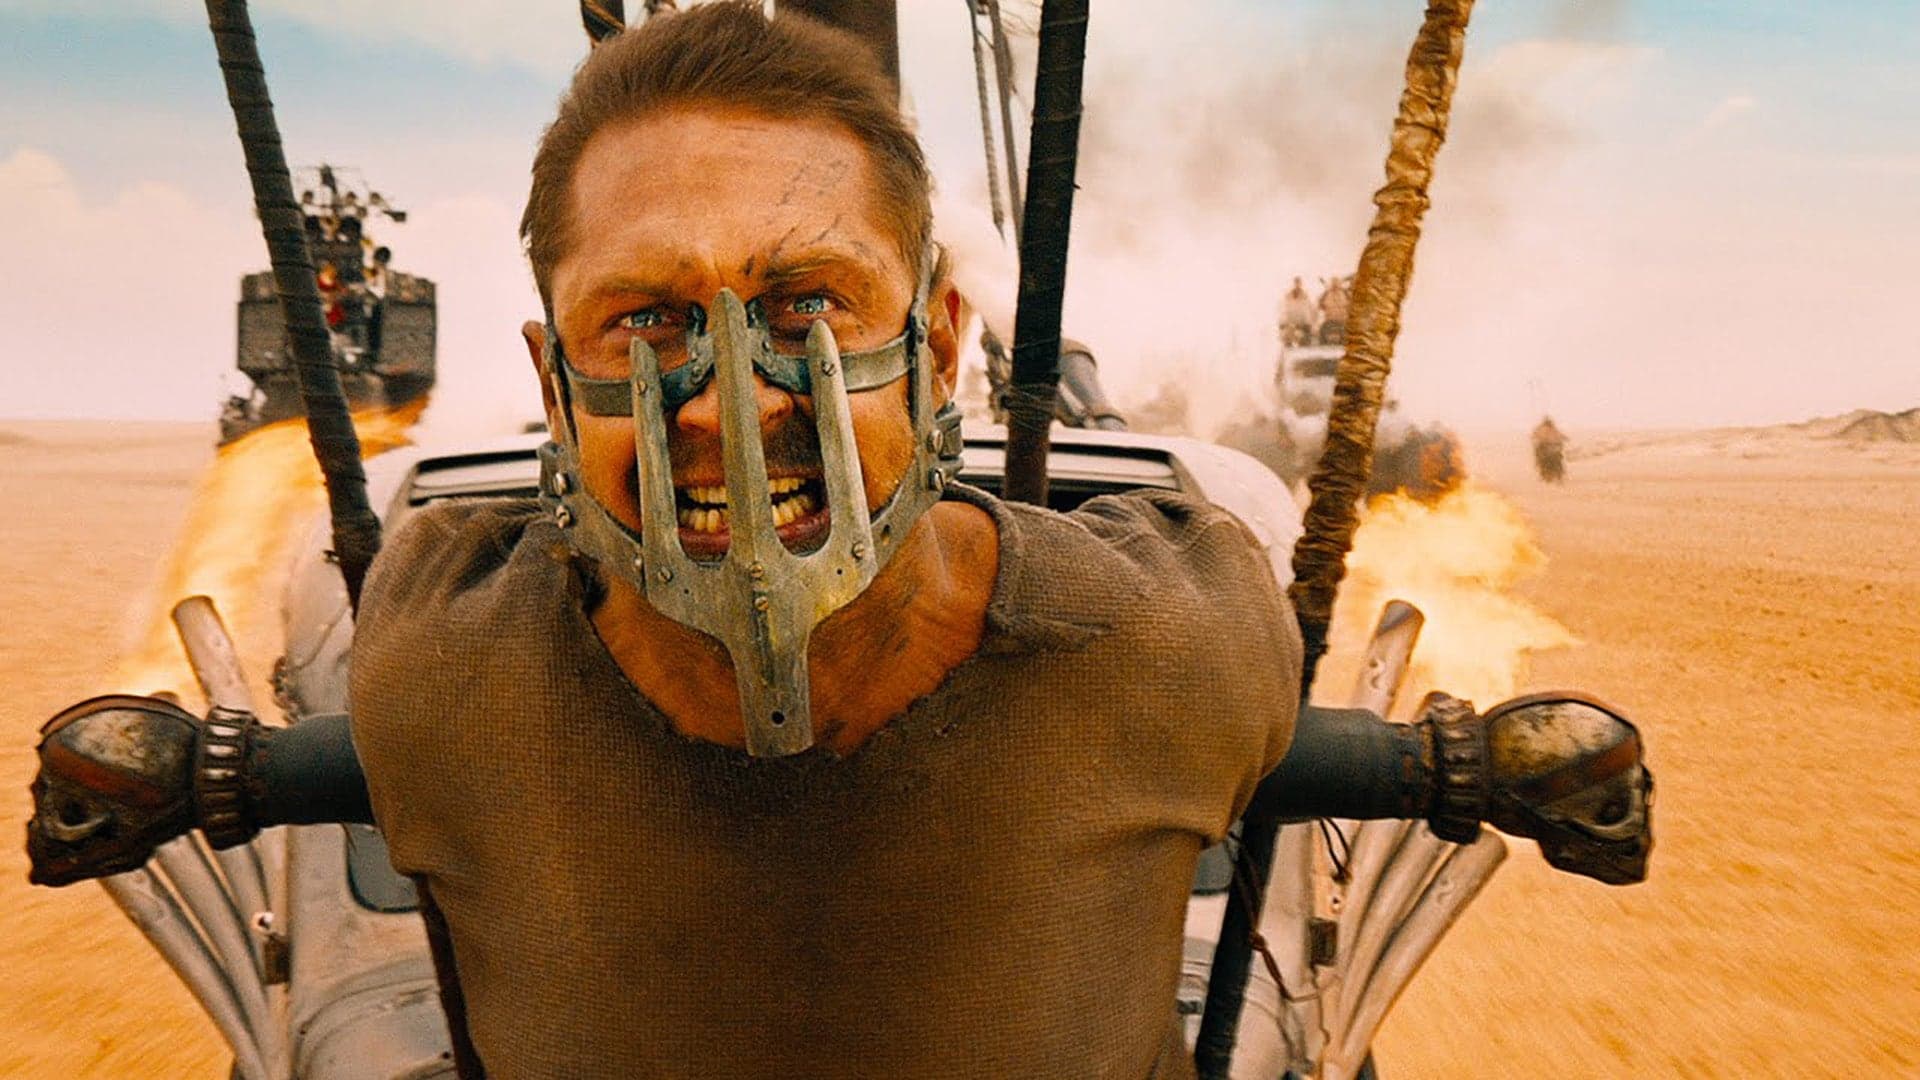 The Story Behind Mad Max: Fury Road Is As Brutal as the Movie Itself